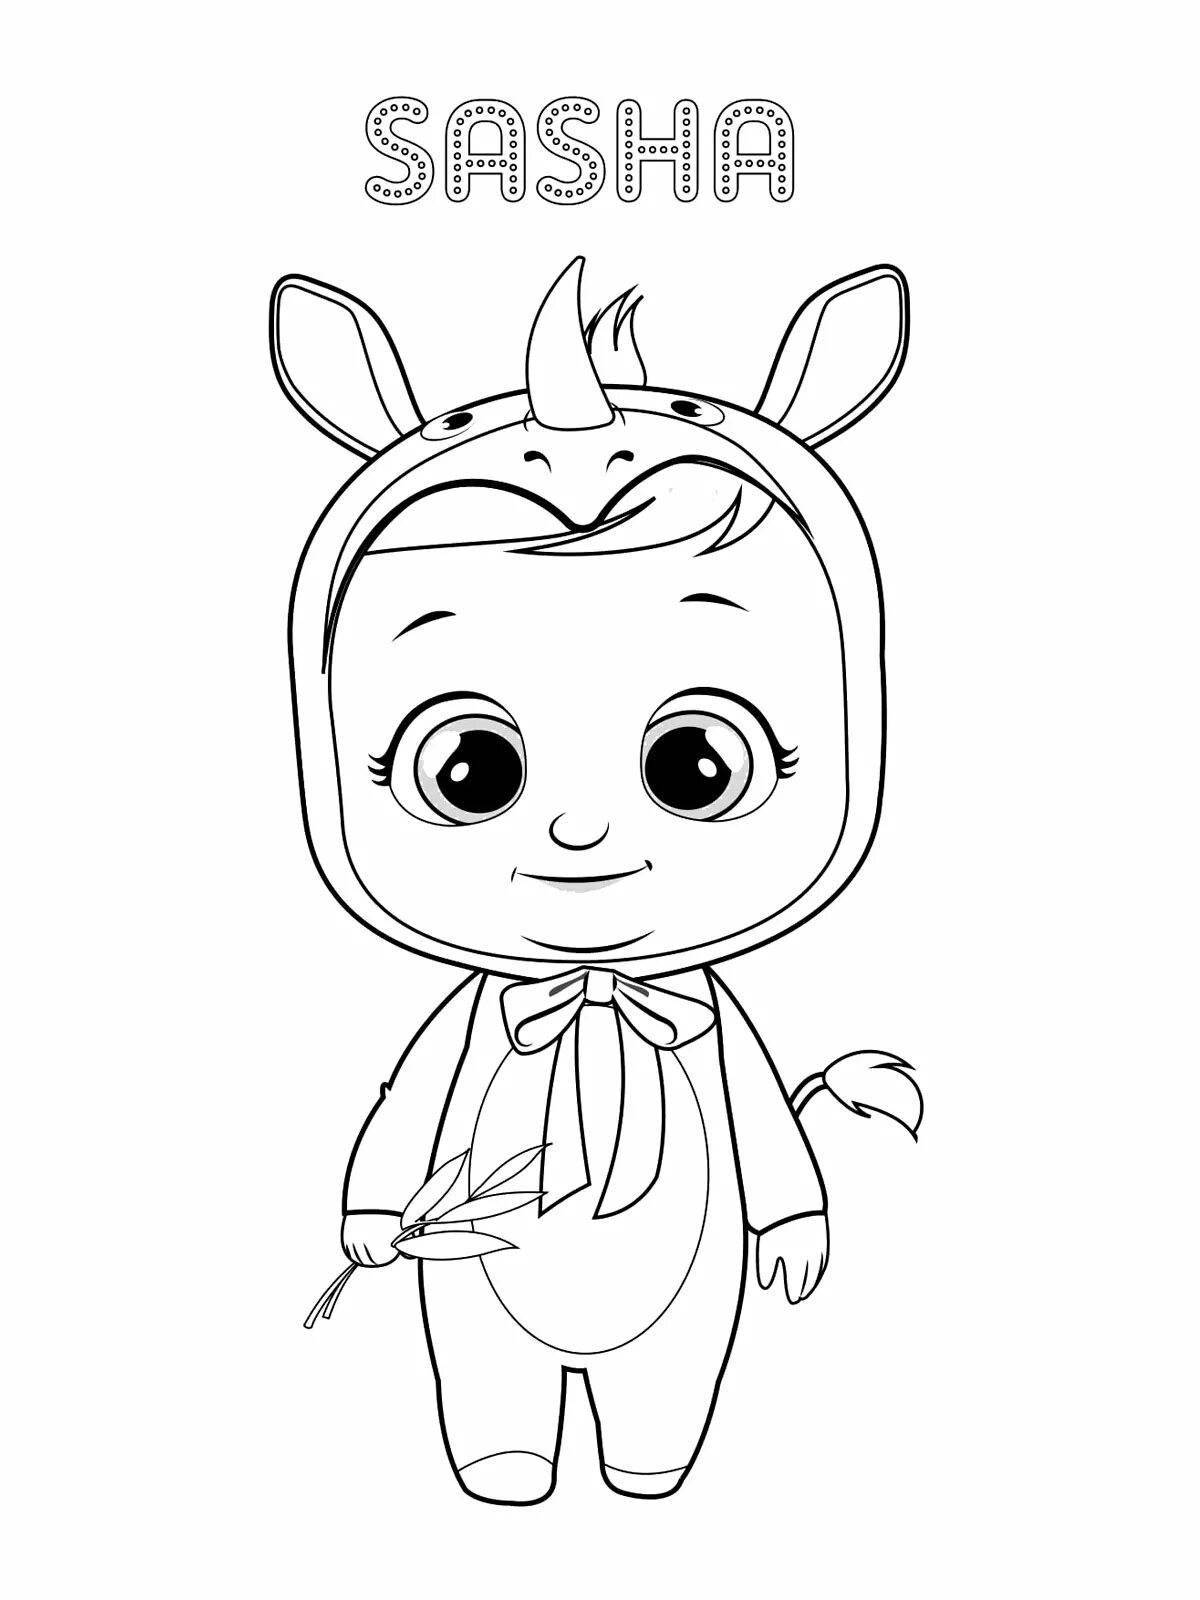 Cute crying babies coloring page